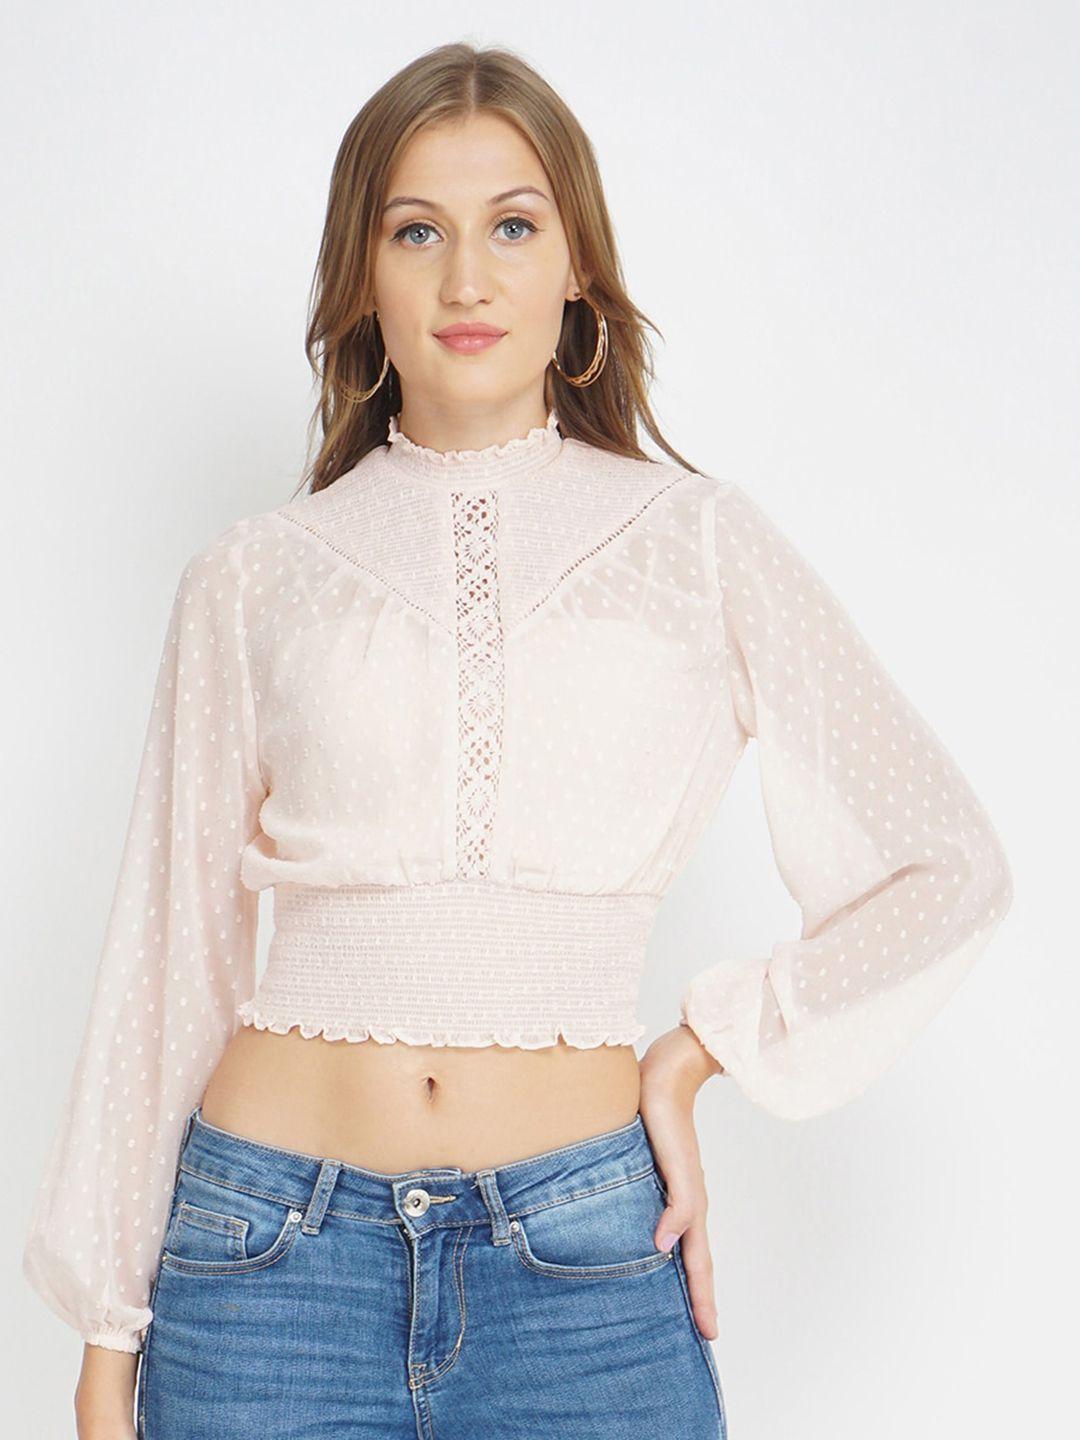 oxolloxo pink victorian smocked blouson crop top